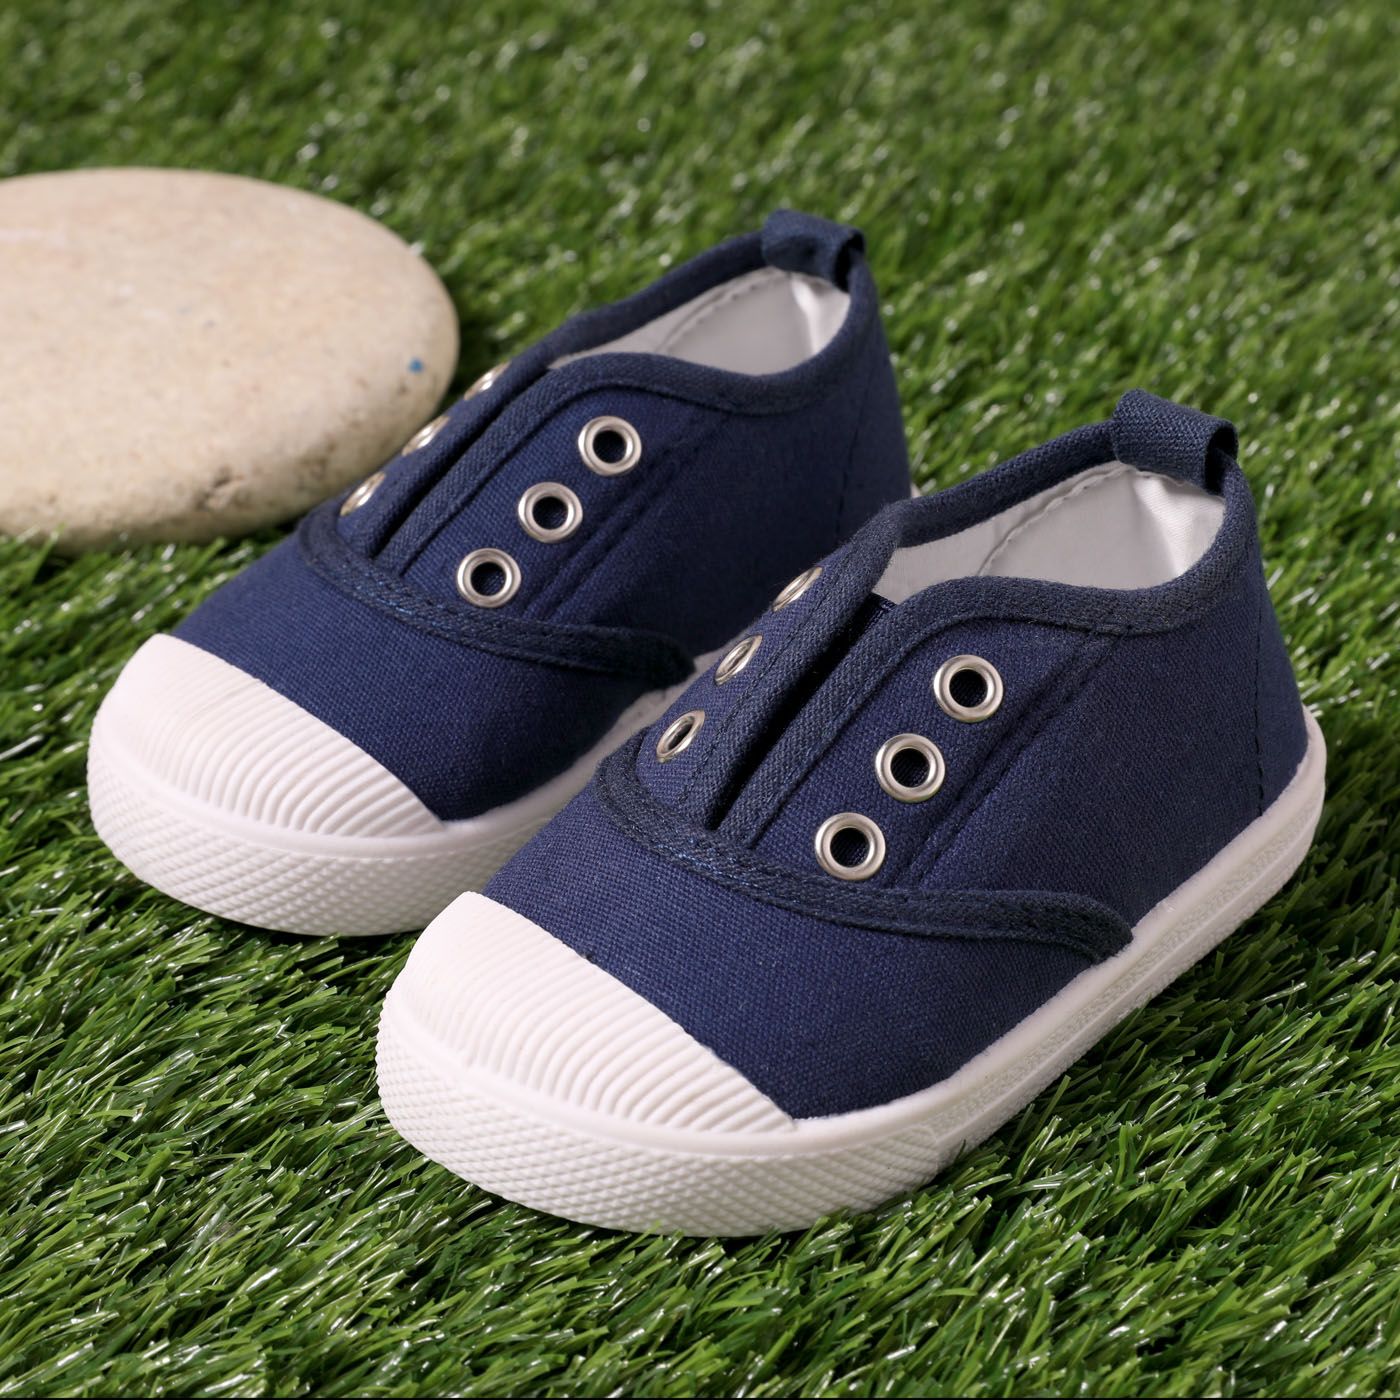 Toddler / Kid Solid Breathable Slip-on Canvas Shoes